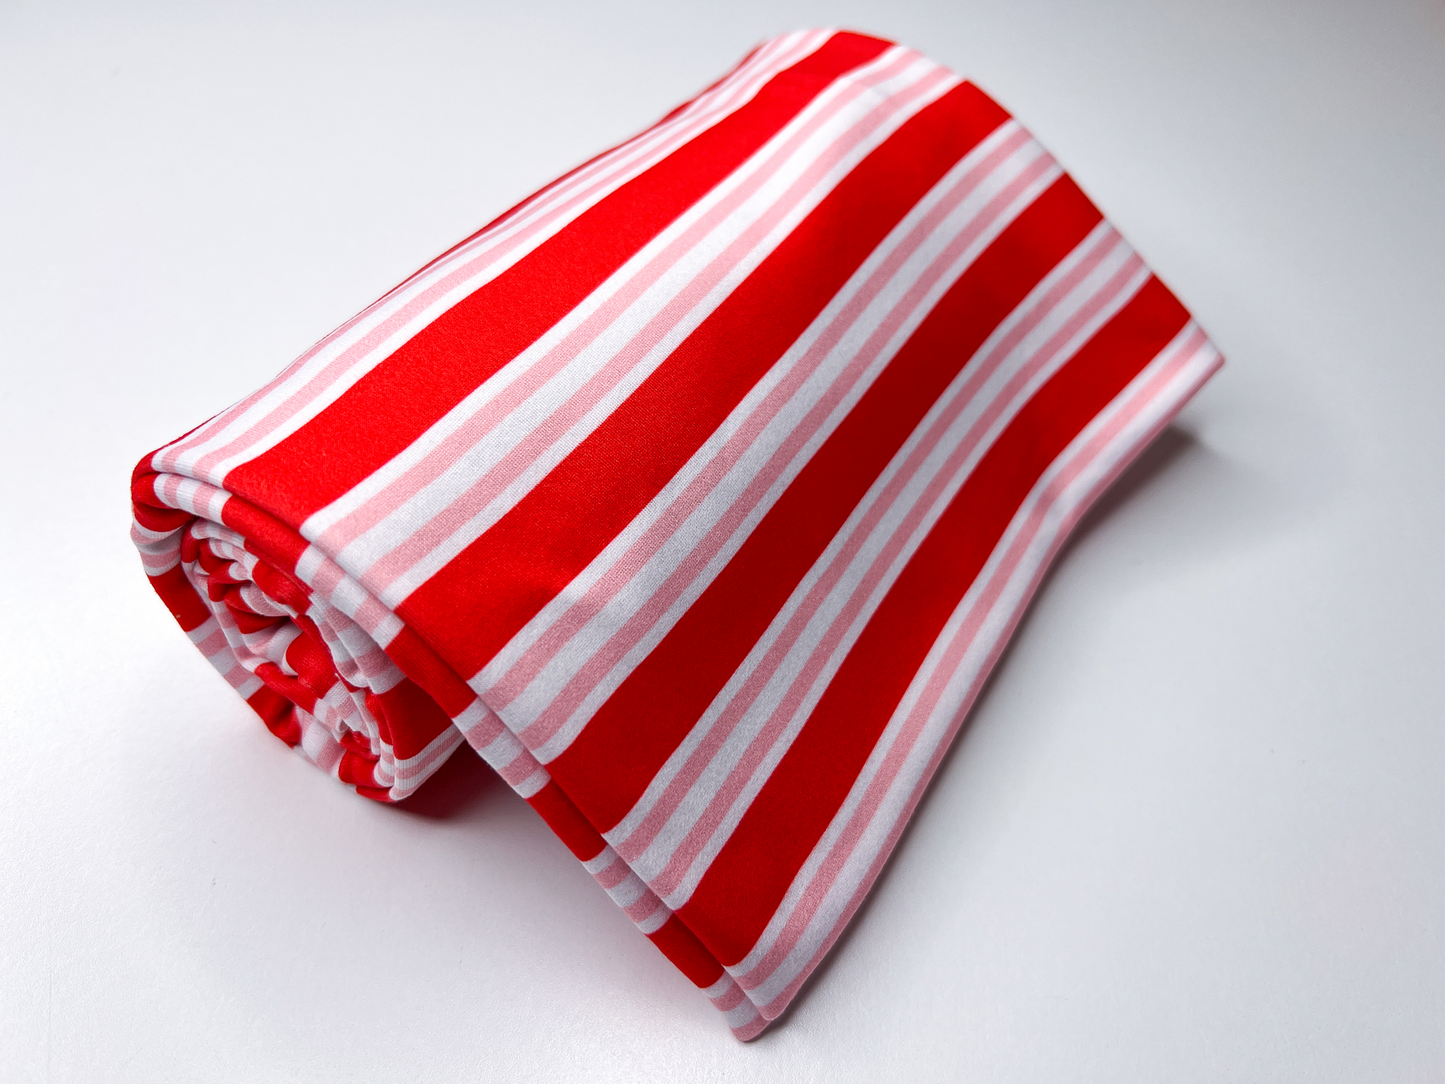 RTS - DBP(240gsm) - Red/Pink Stripes